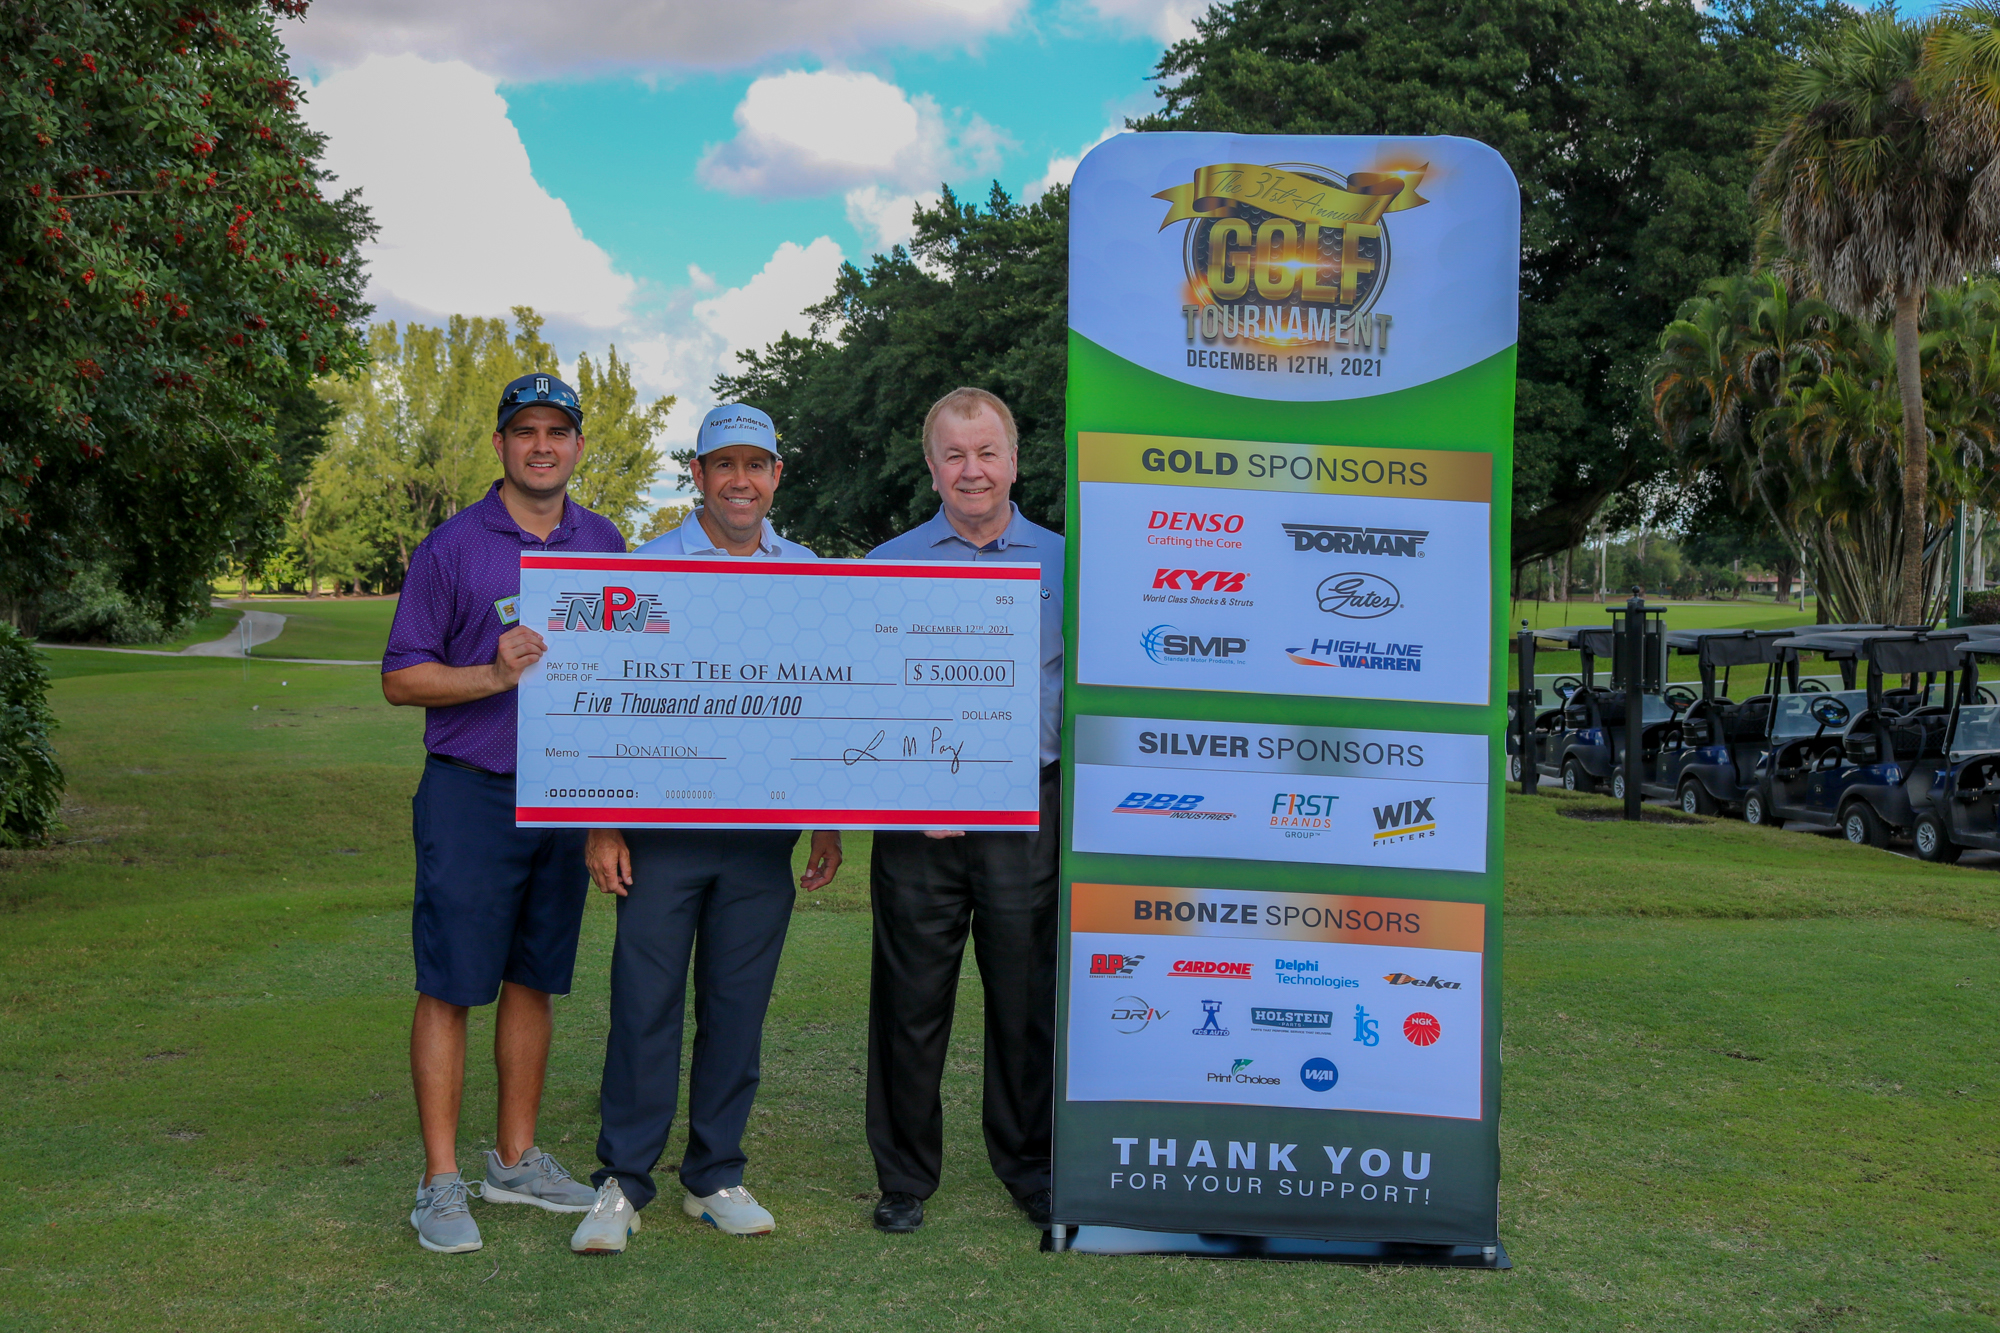 NPW Hosts Annual Charity Golf Event | THE SHOP